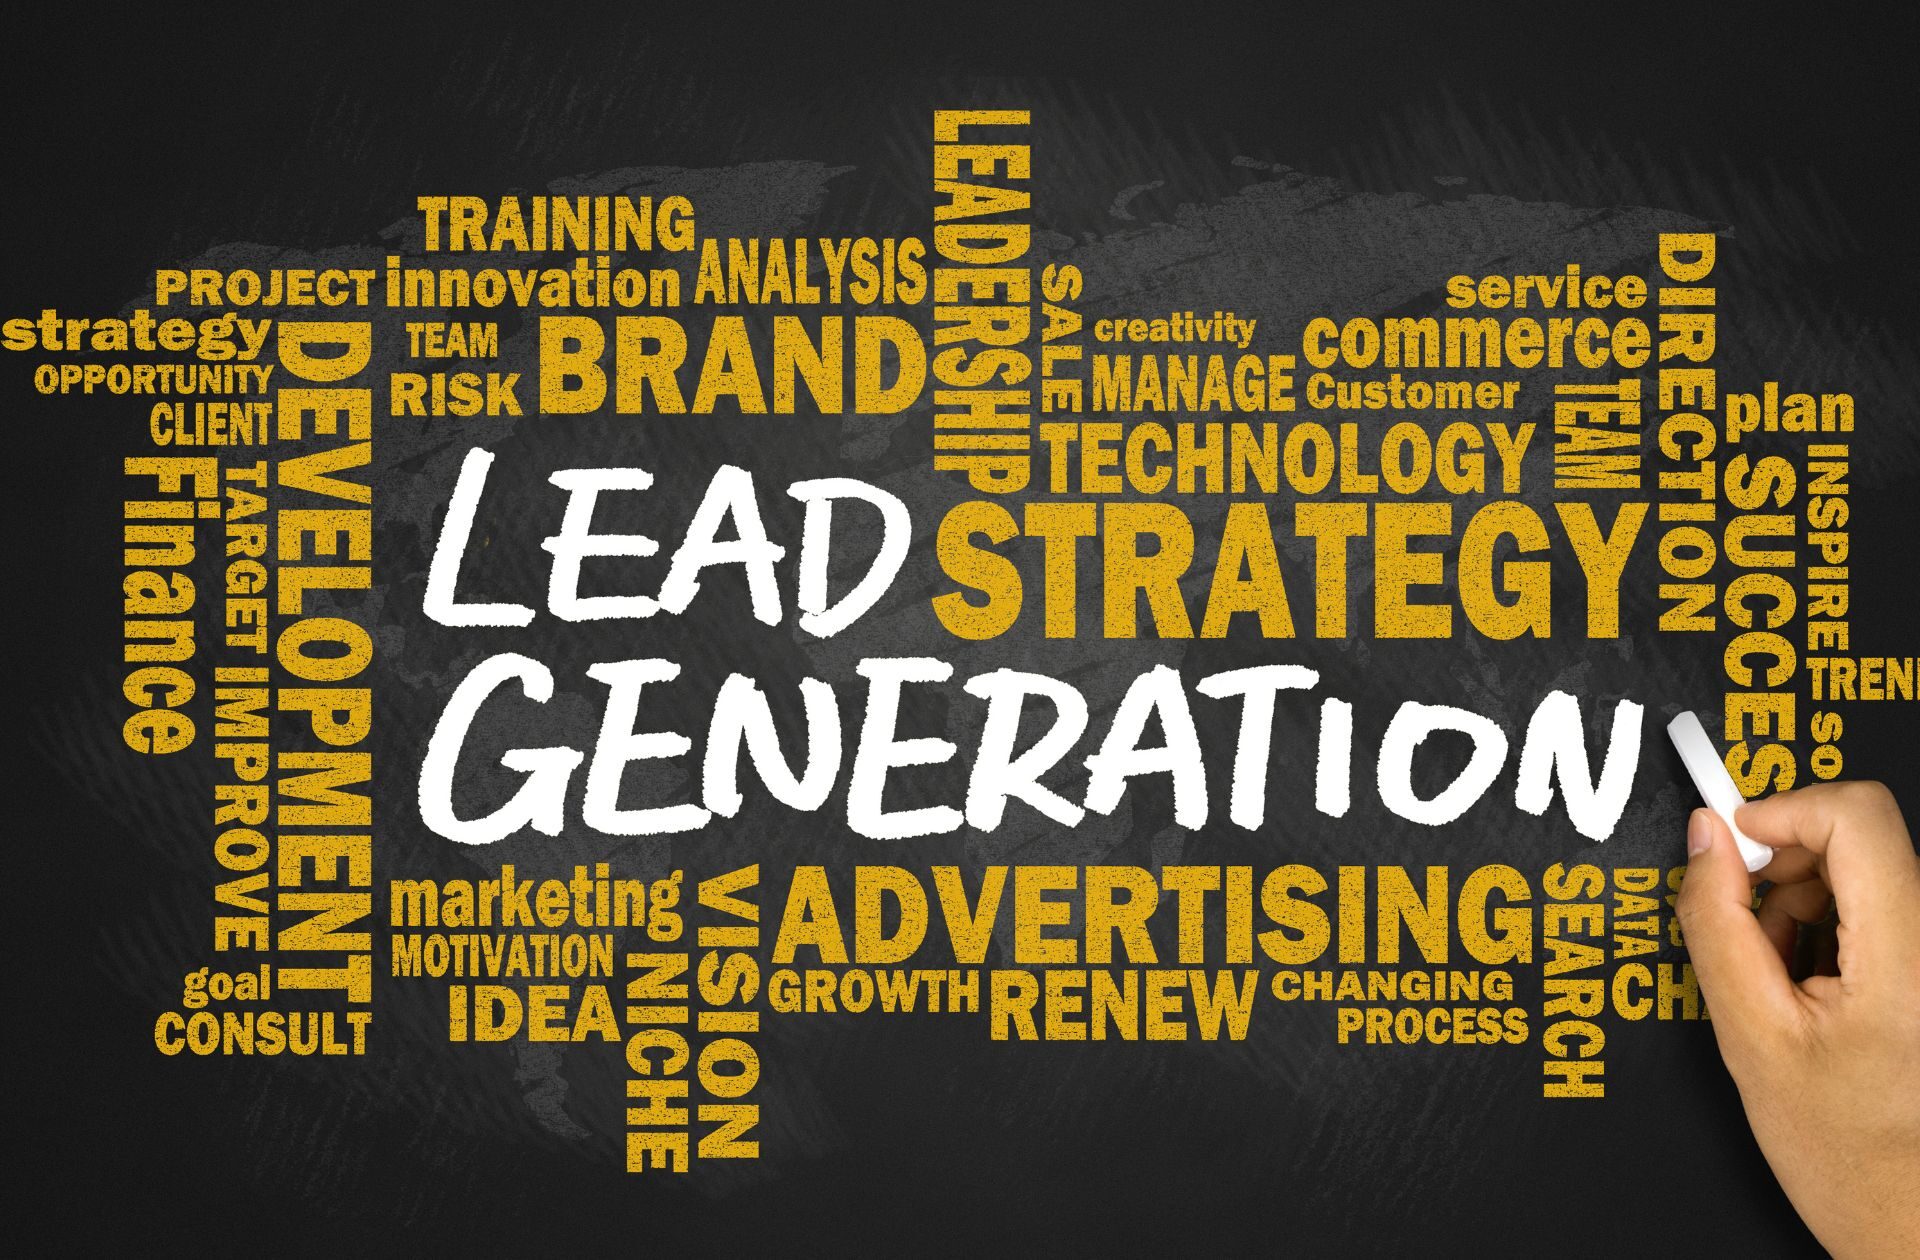 How can small businesses benefit from automated lead generation?